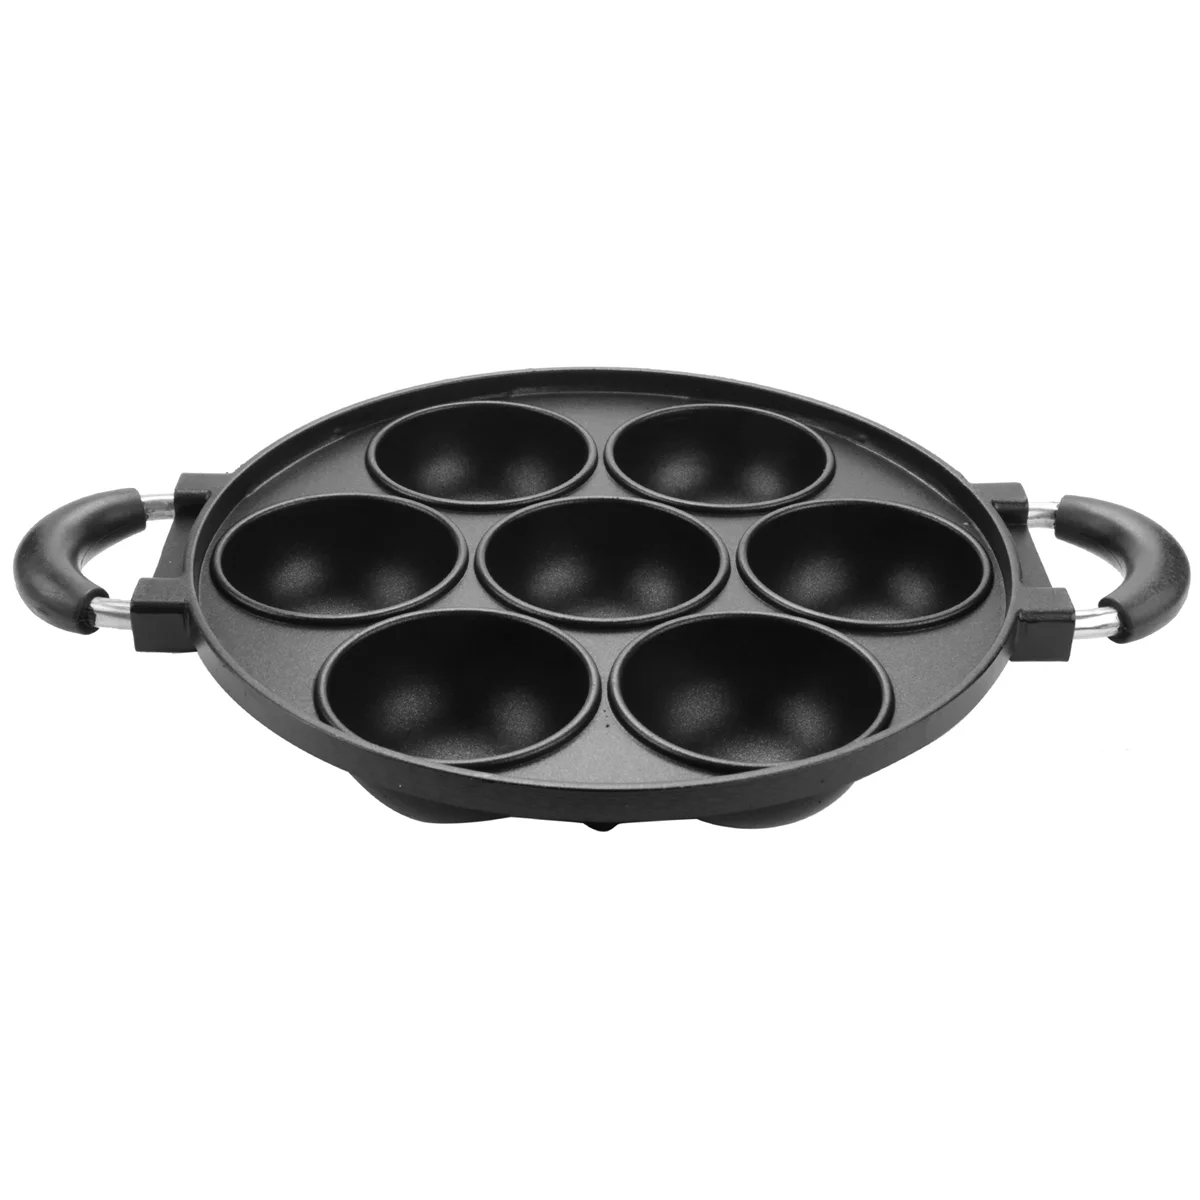 7 Hole Cooking Cake Pan Cast Iron Omelette Pan Non-Stick Cooking Pot Breakfast Egg Cooker Cake Mold Kitchen Cookware